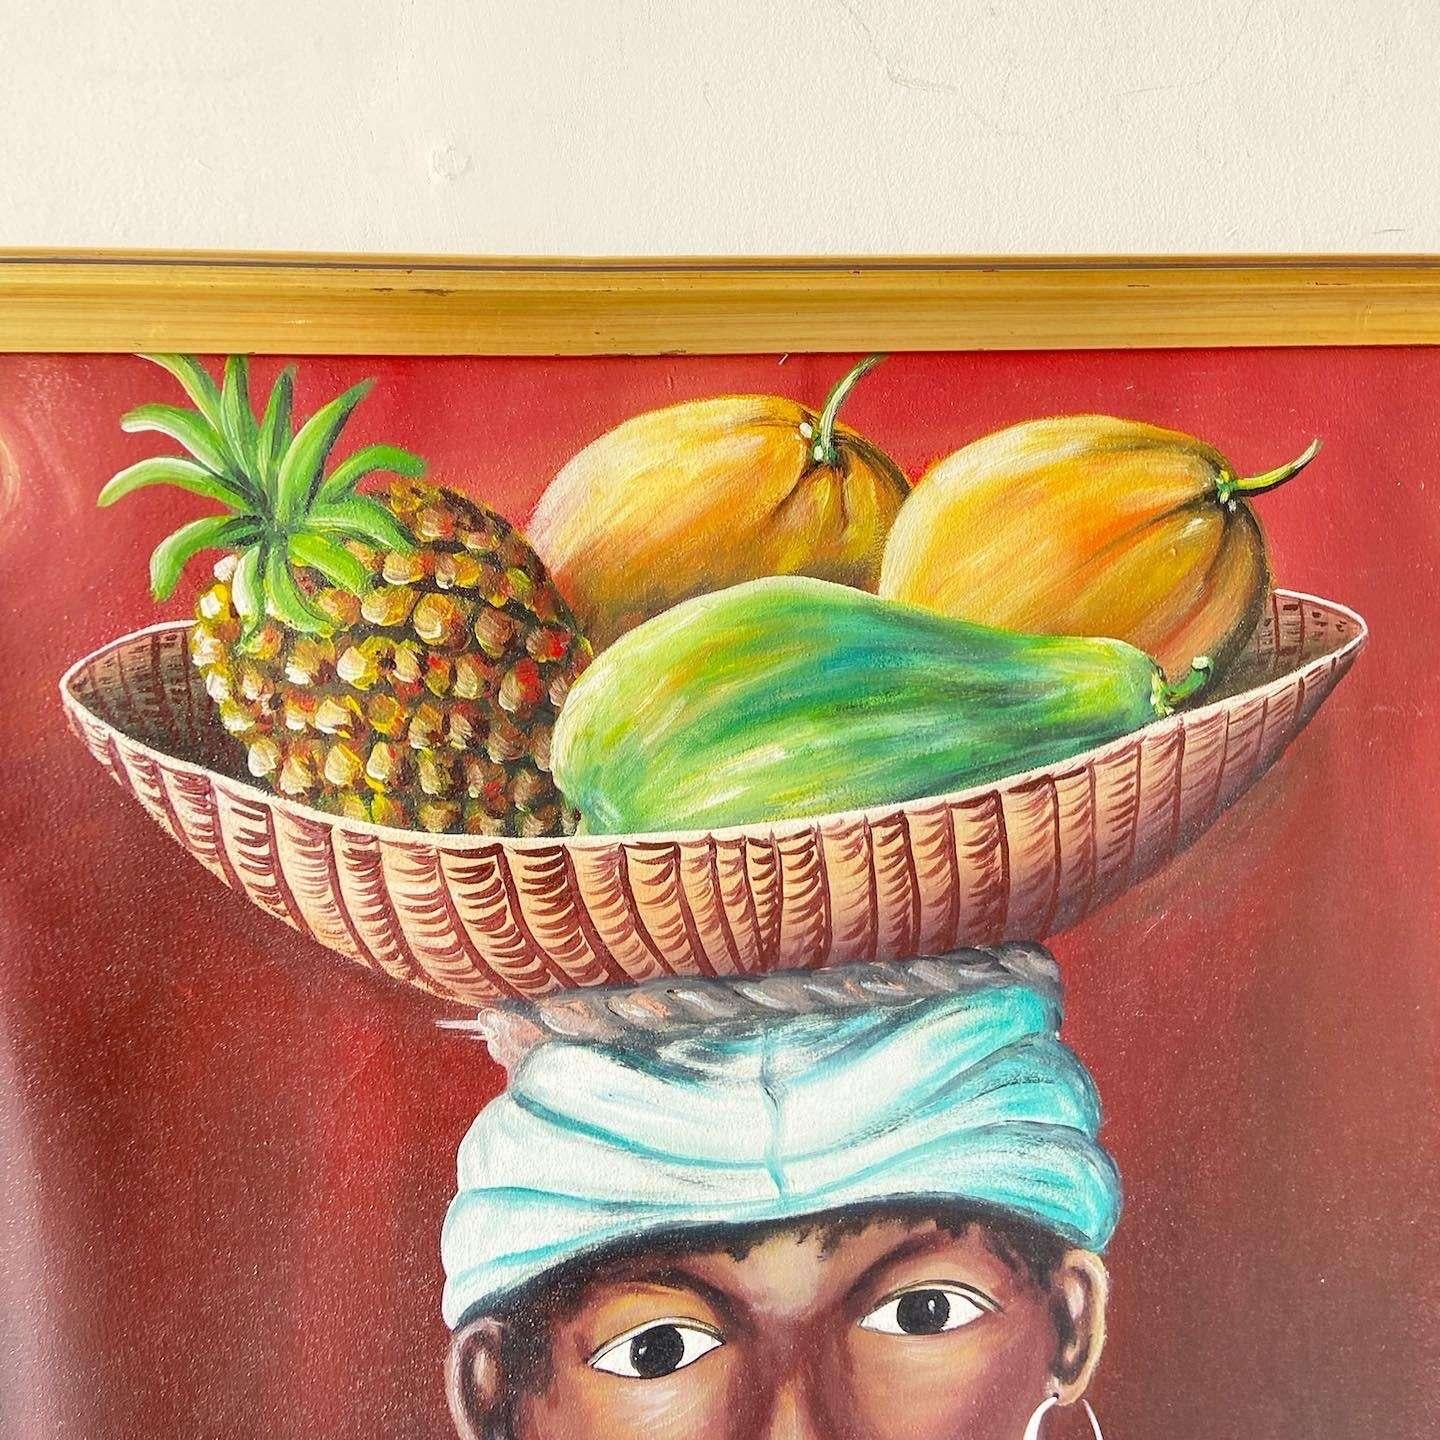 Original Framed Oil Painting of Caribbean Woman With Fruit Bowl by Scroggin For Sale 2